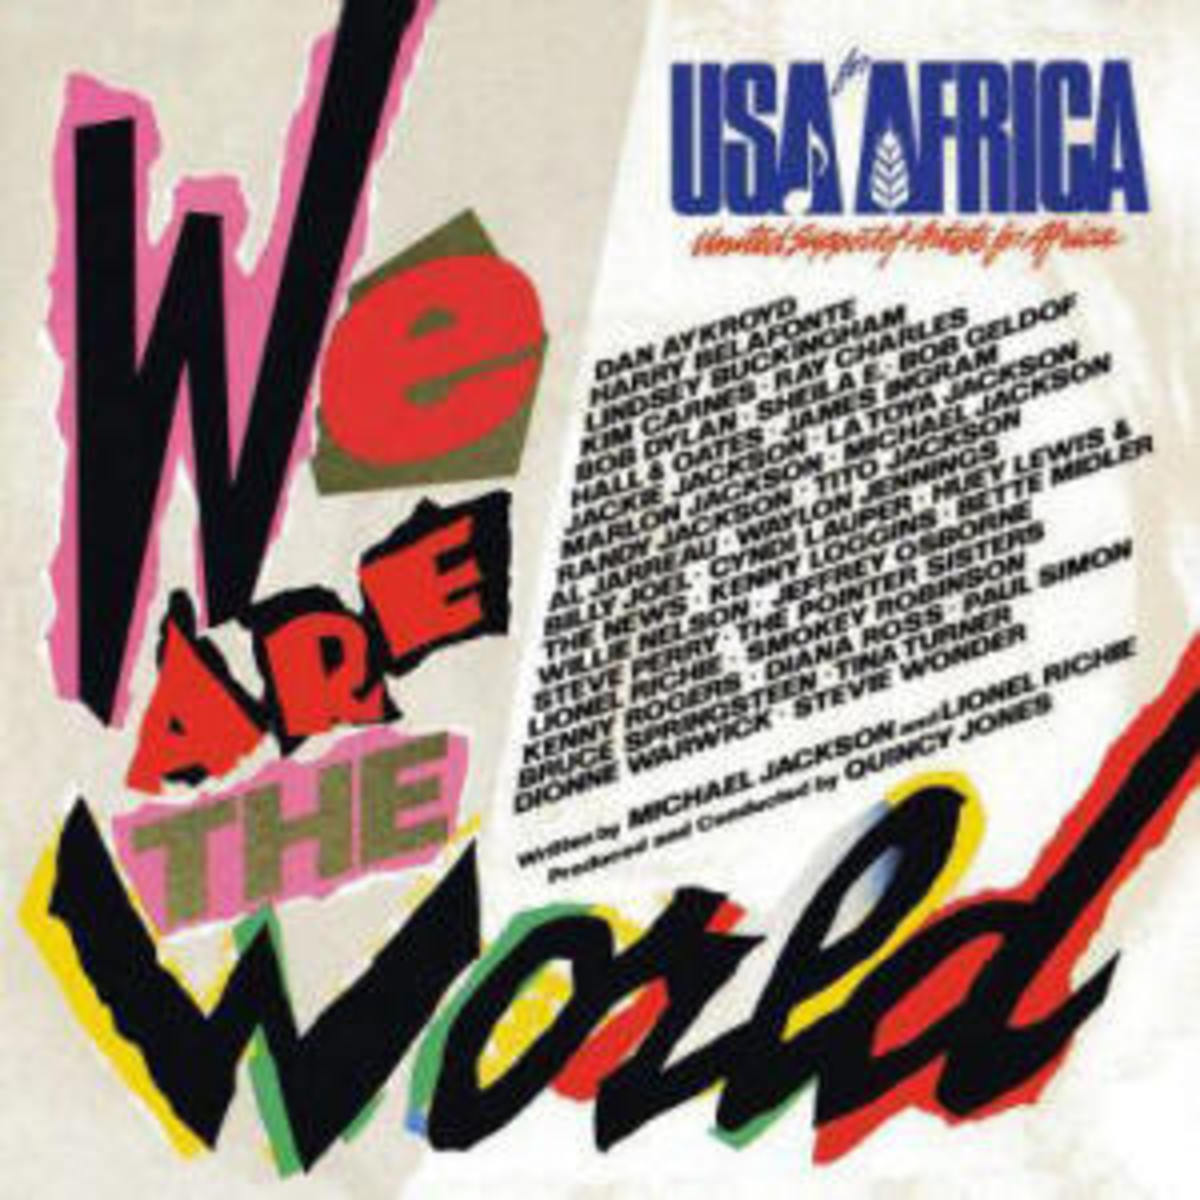 We are the world (1985)